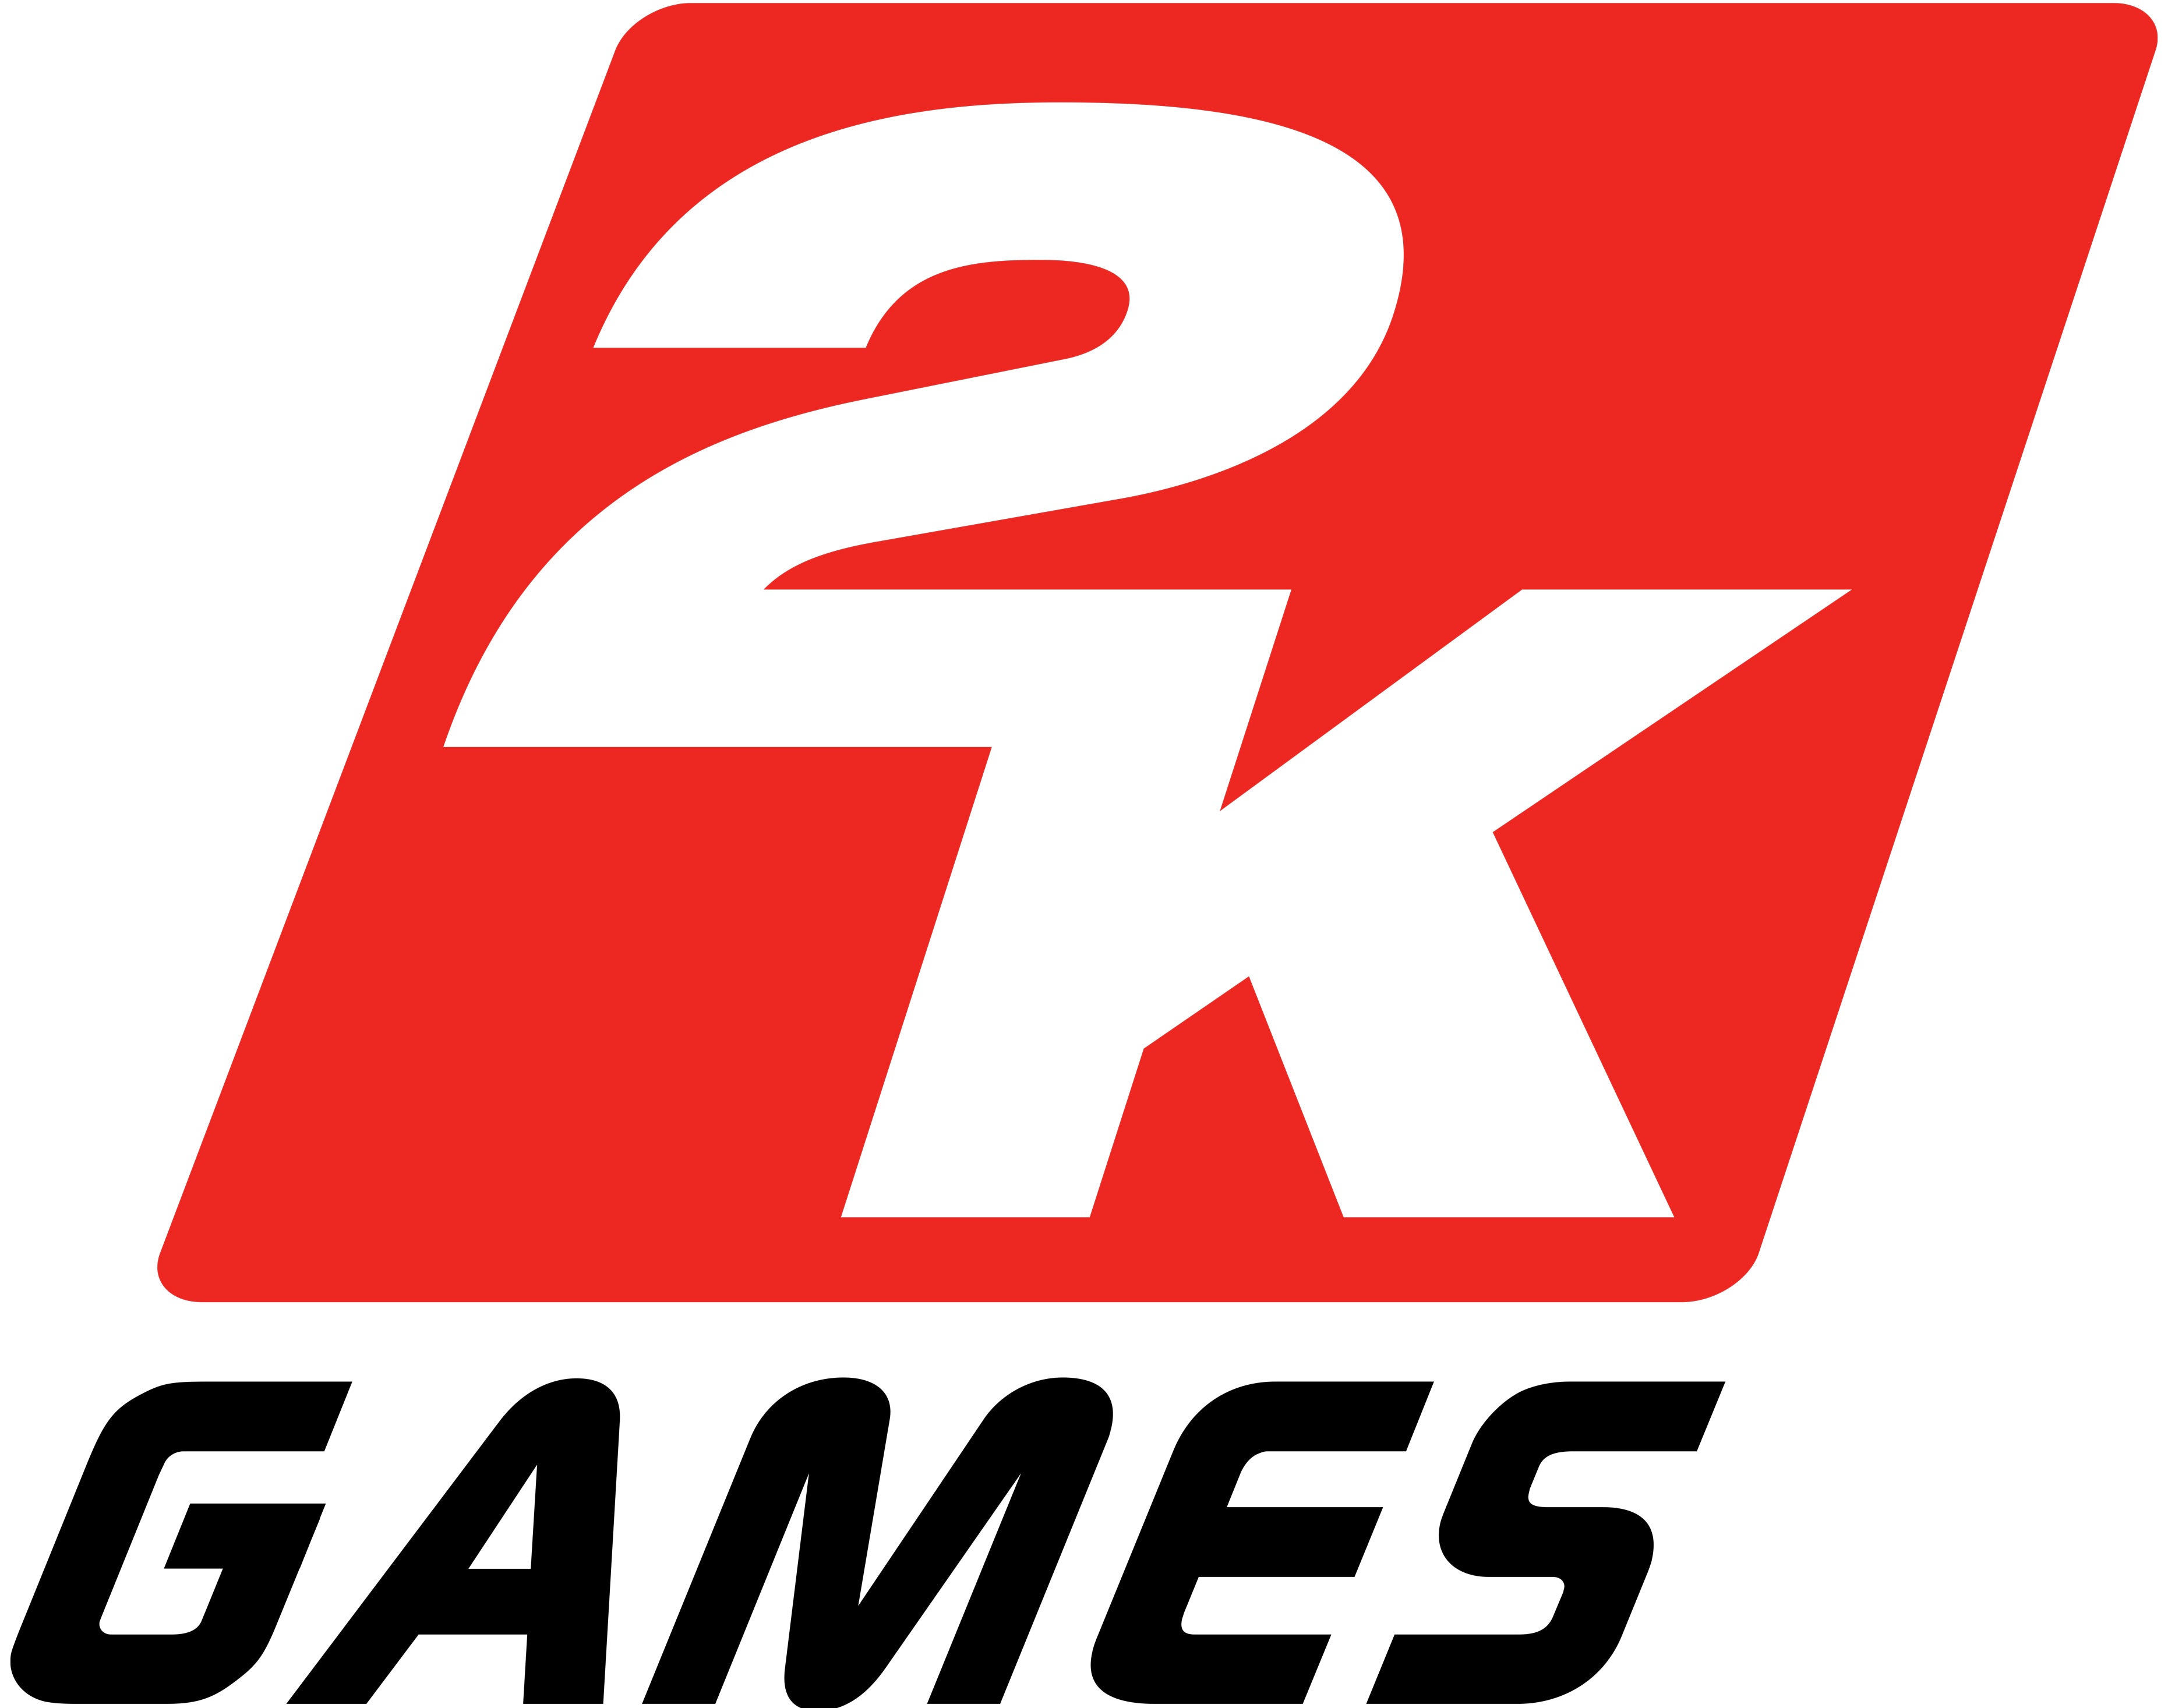 2K Games Merchandise Collection